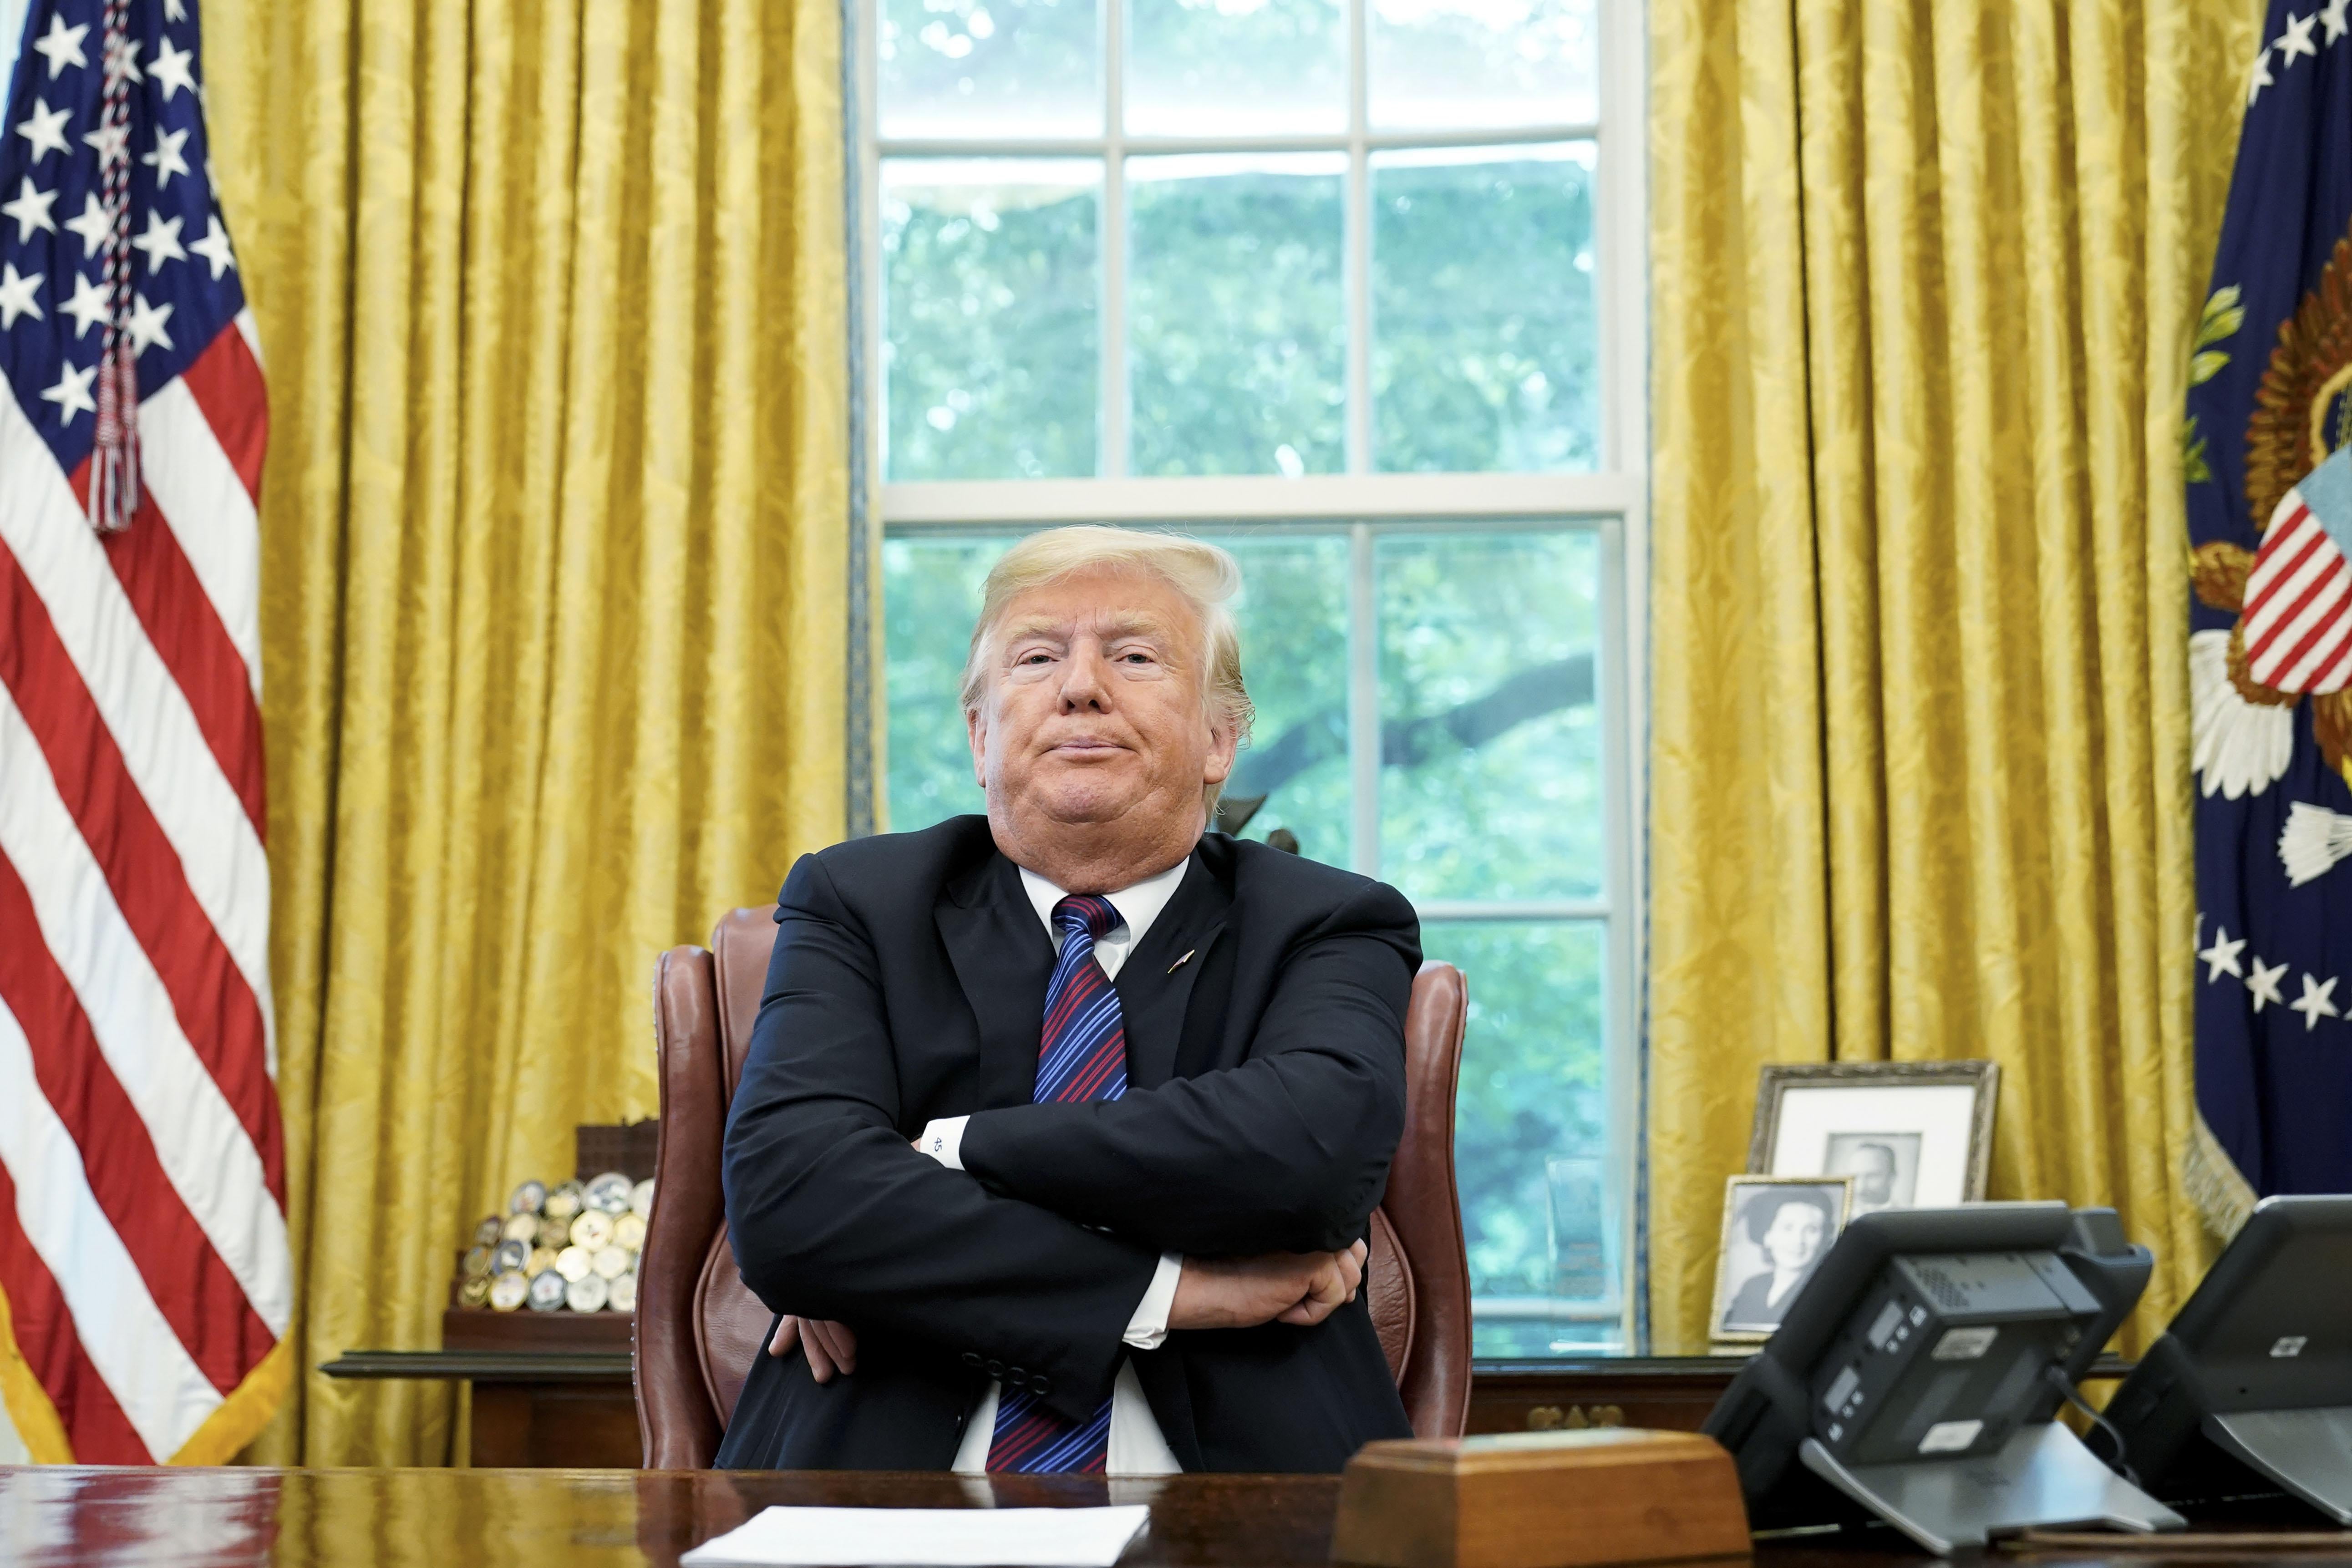 President Donald Trump sits at his desk in the Oval Office with his arms crossed and chin jutting out.